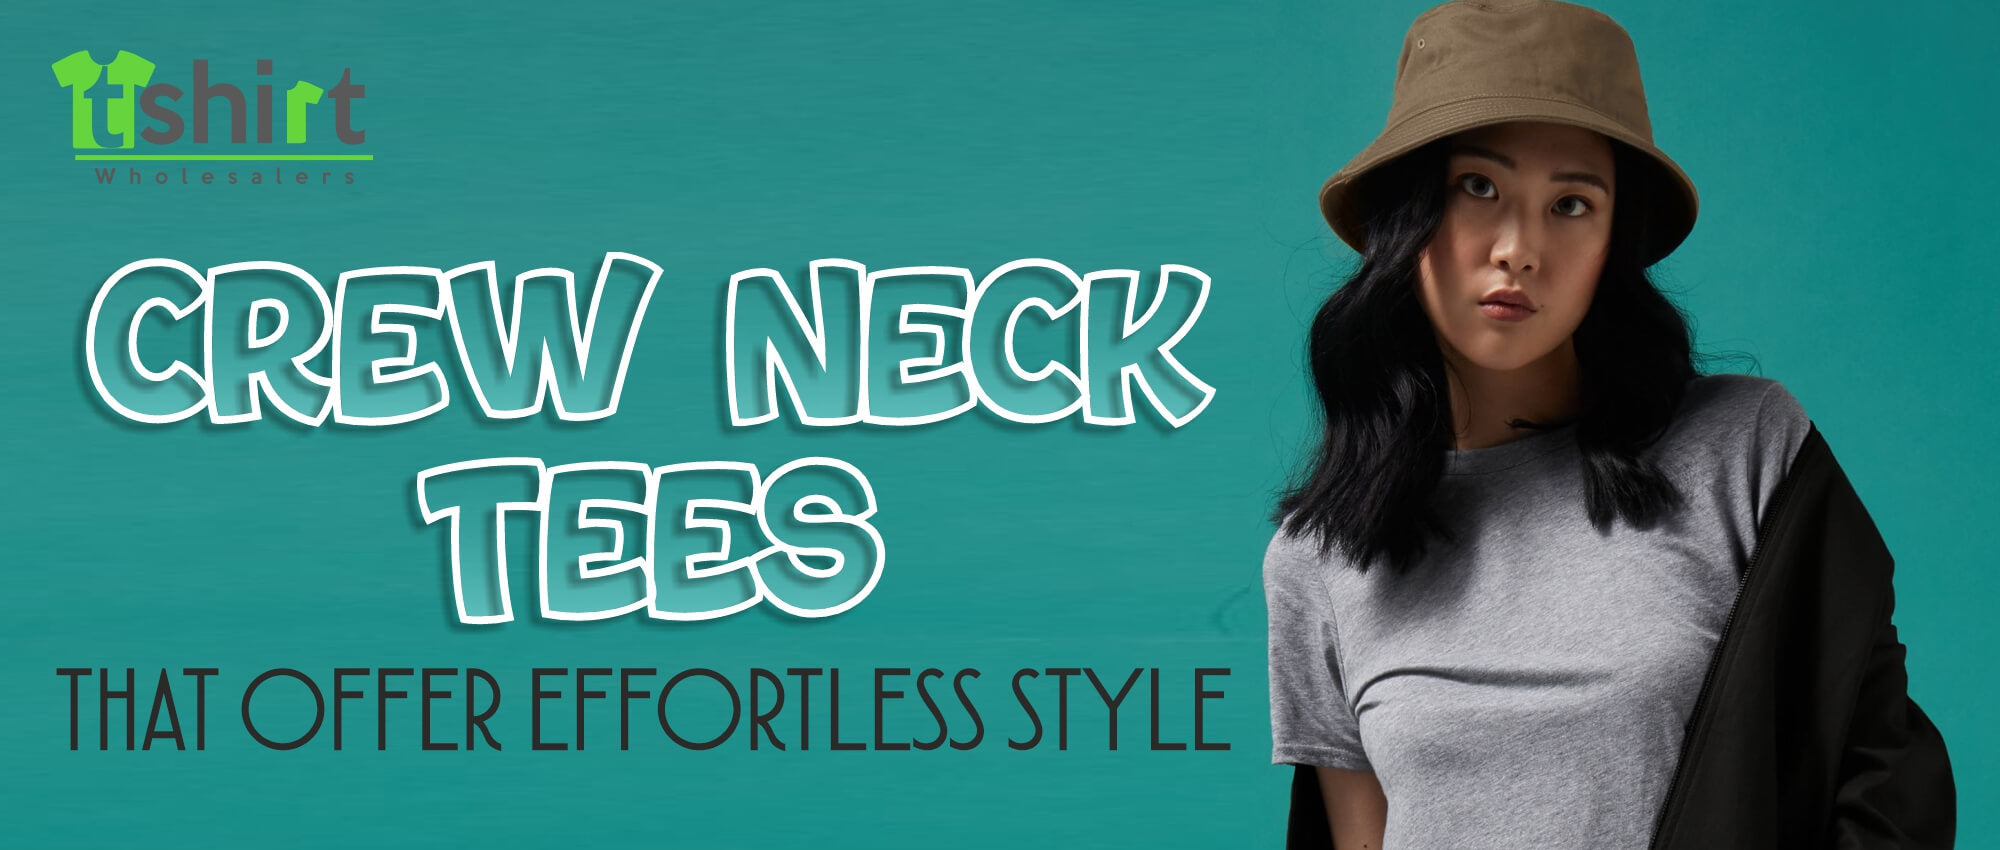 CREW NECK TEES THAT OFFER EFFORTLESS STYLE